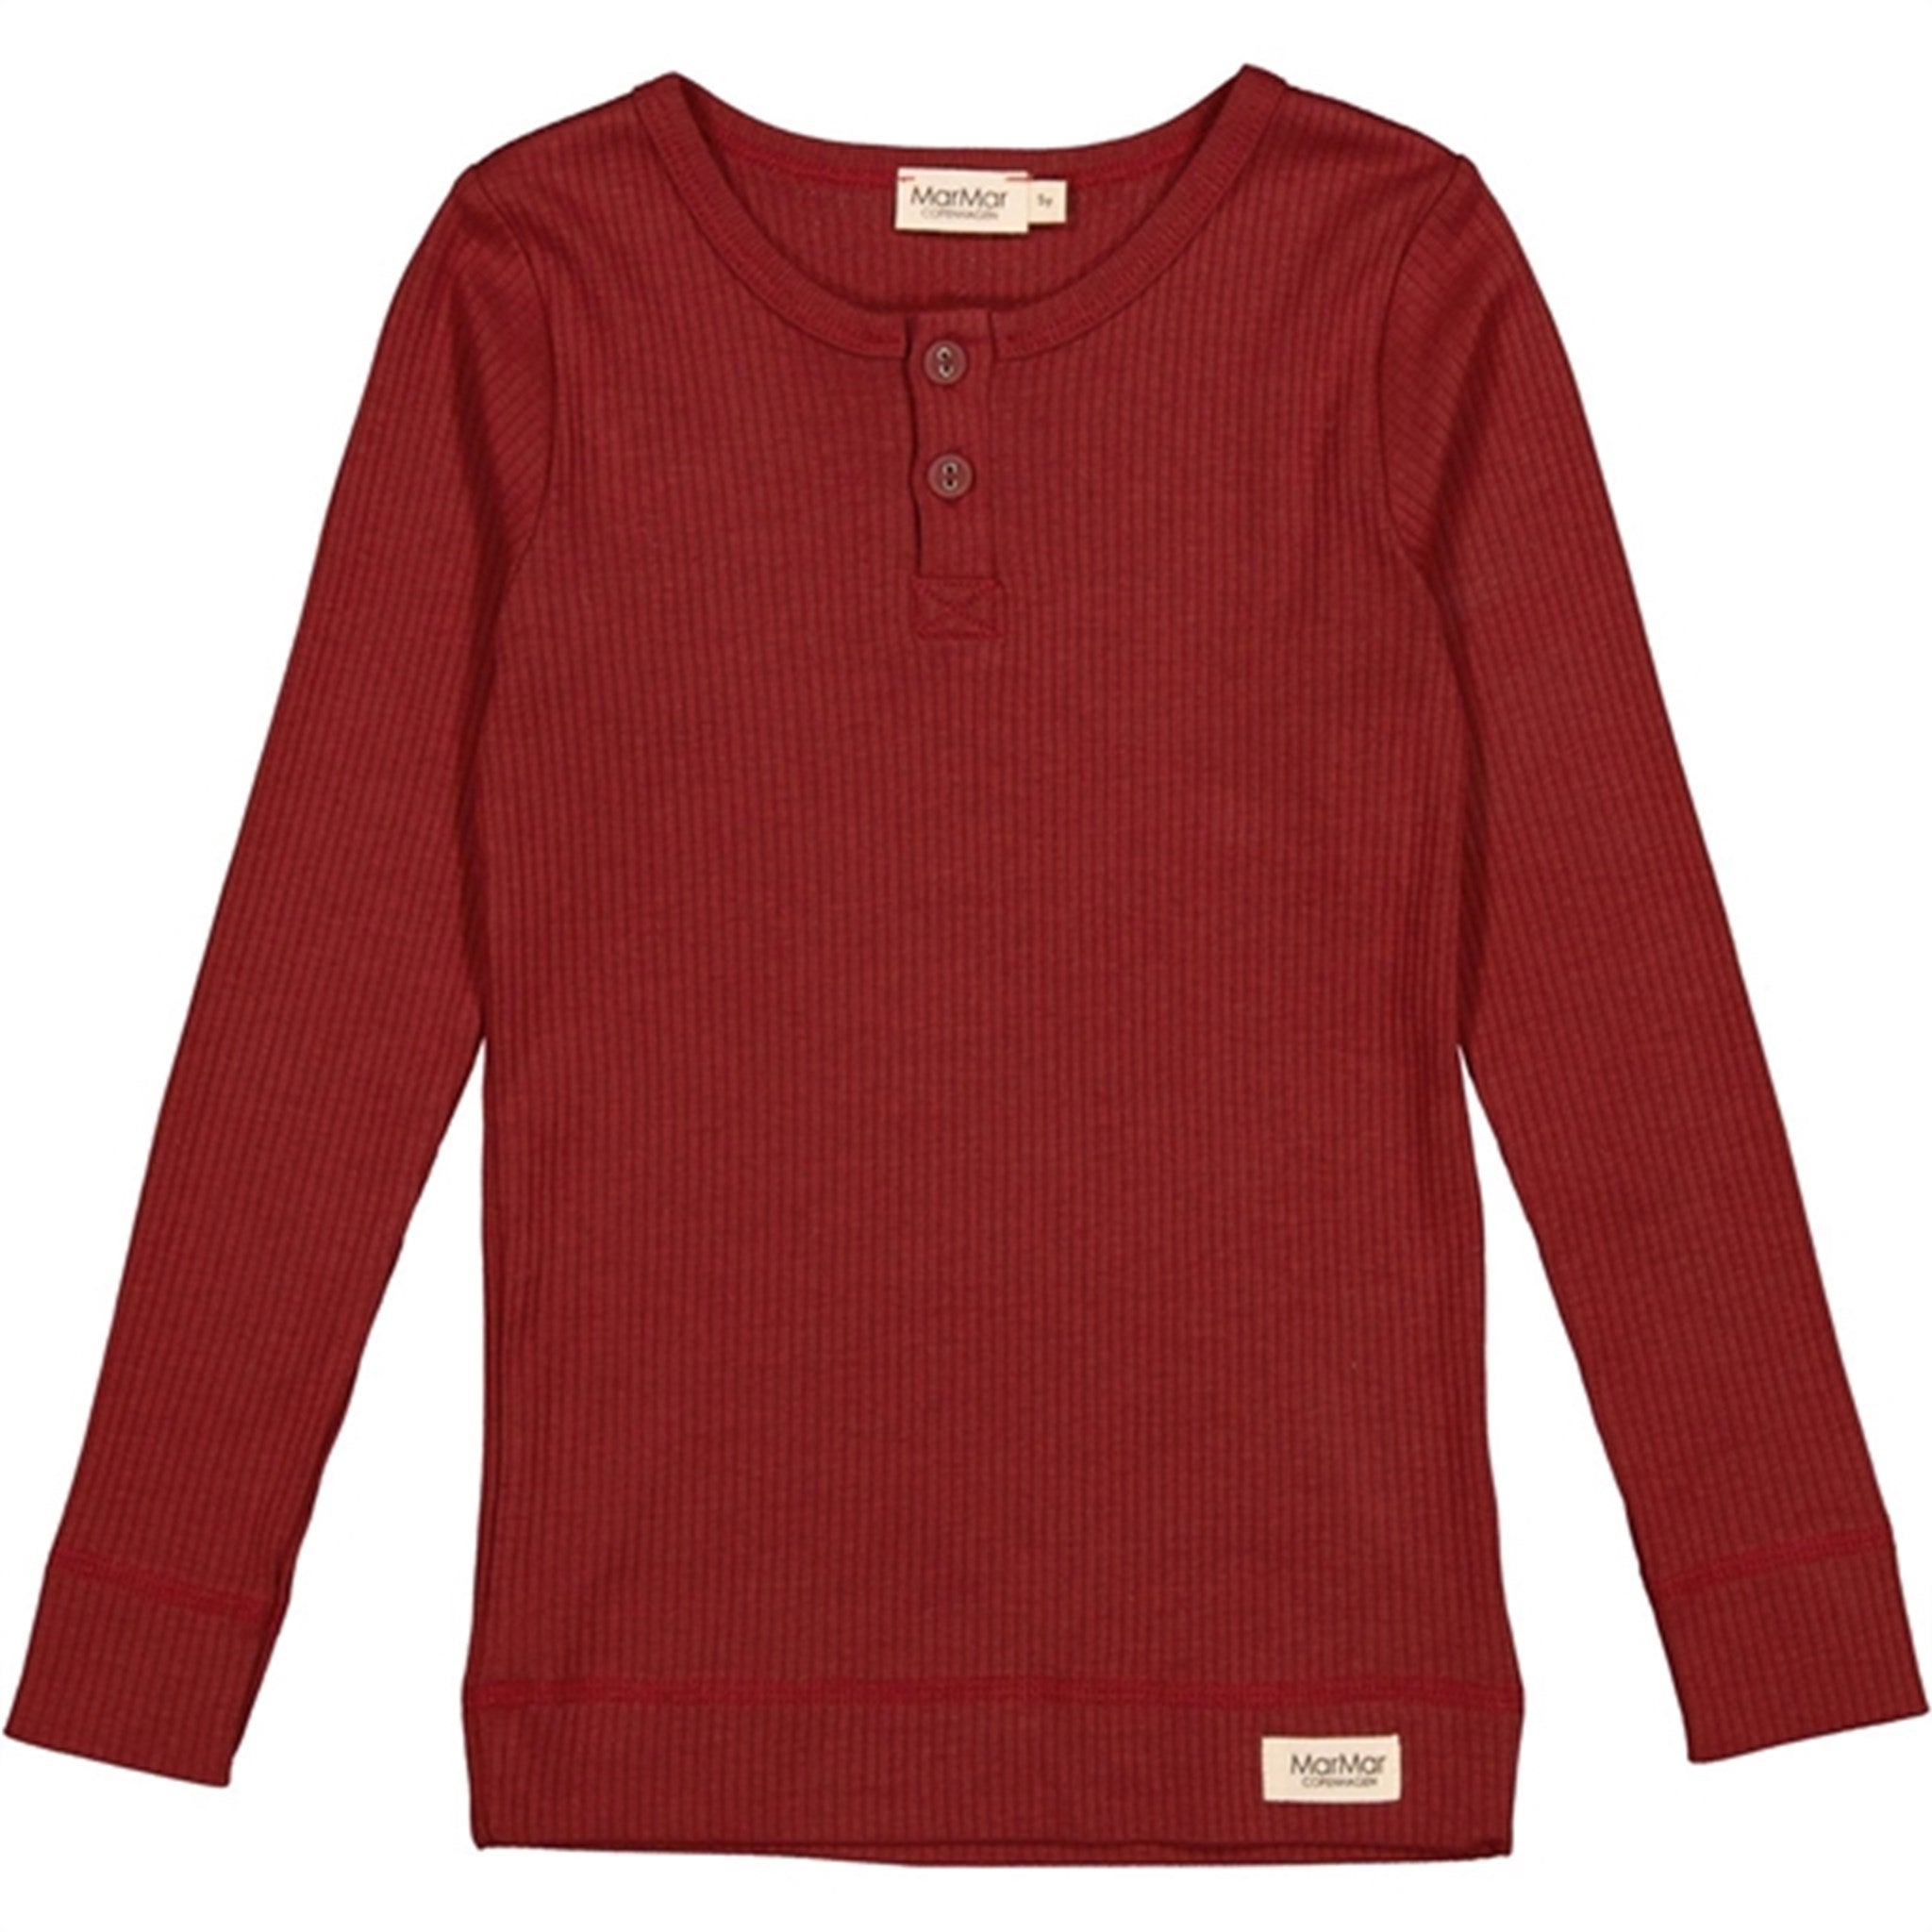 MarMar Modal Hibiscus Red Bluse